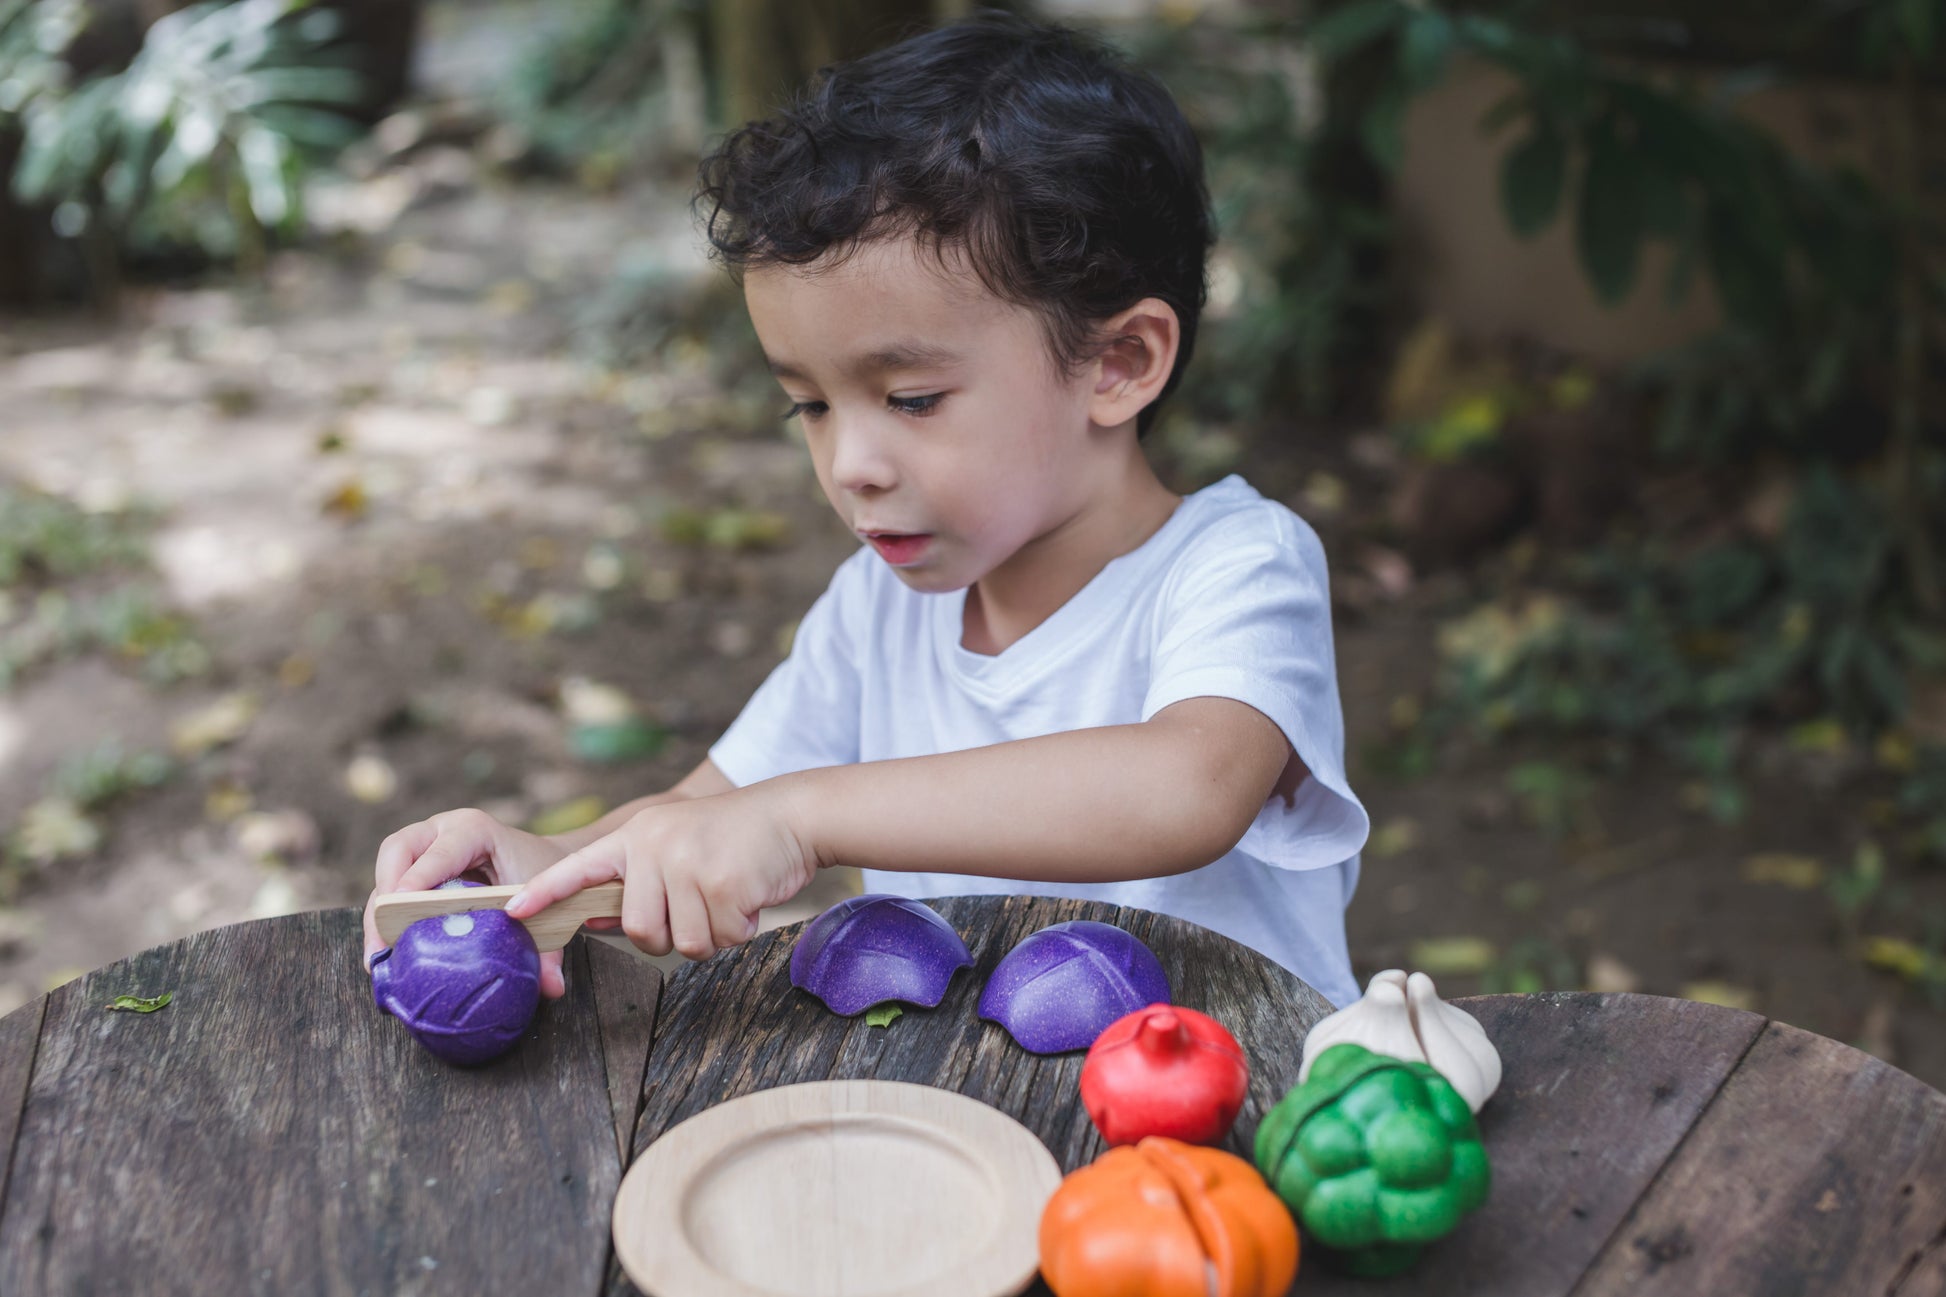 A child playing with a wooden vegetables on a wood table outdoors. The child scuttling the onion